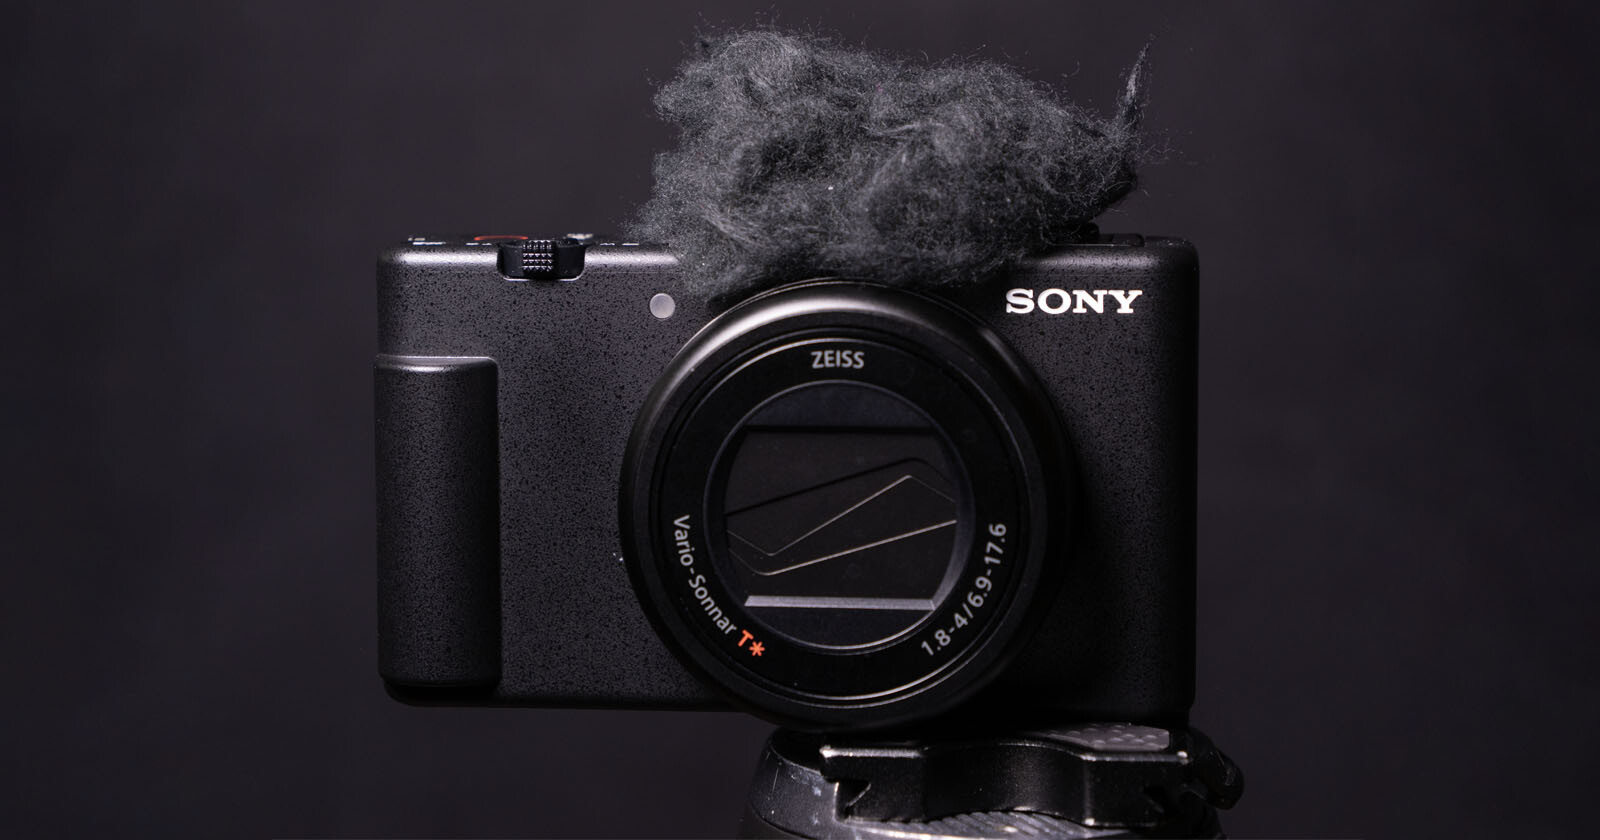 Sony’s New ZV-1 Mark II Vlogging Cam Brings in a Wider 18-50mm Lens